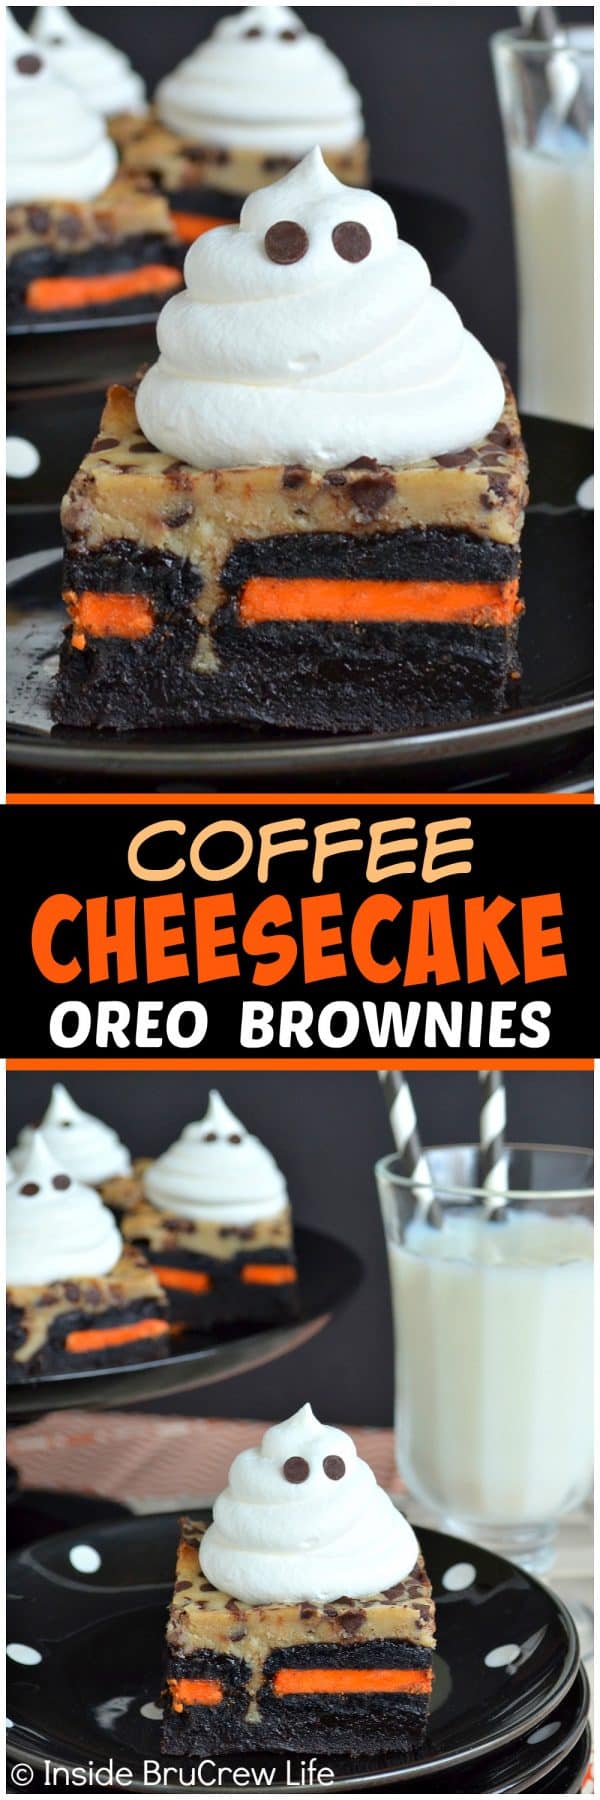 Coffee Cheesecake Oreo Brownies - a Cool Whip ghost and a hidden layer of holiday Oreos adds a fun flair to these cheesecake brownies. Delicious recipe to share at Halloween parties this fall!